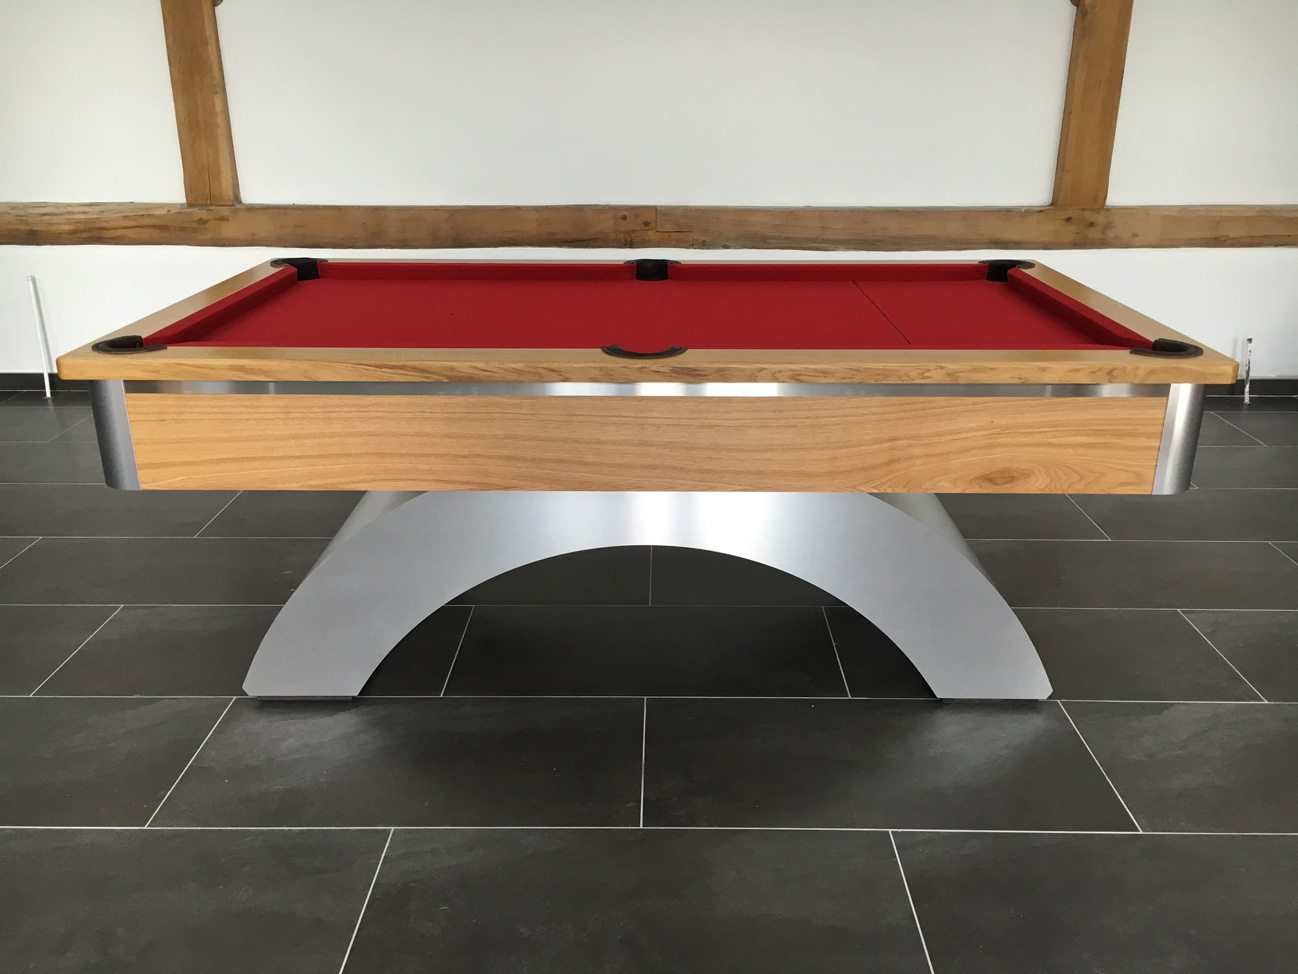 Arched Contemporary English Pool Table with Brushed Aluminium and Oak Finish